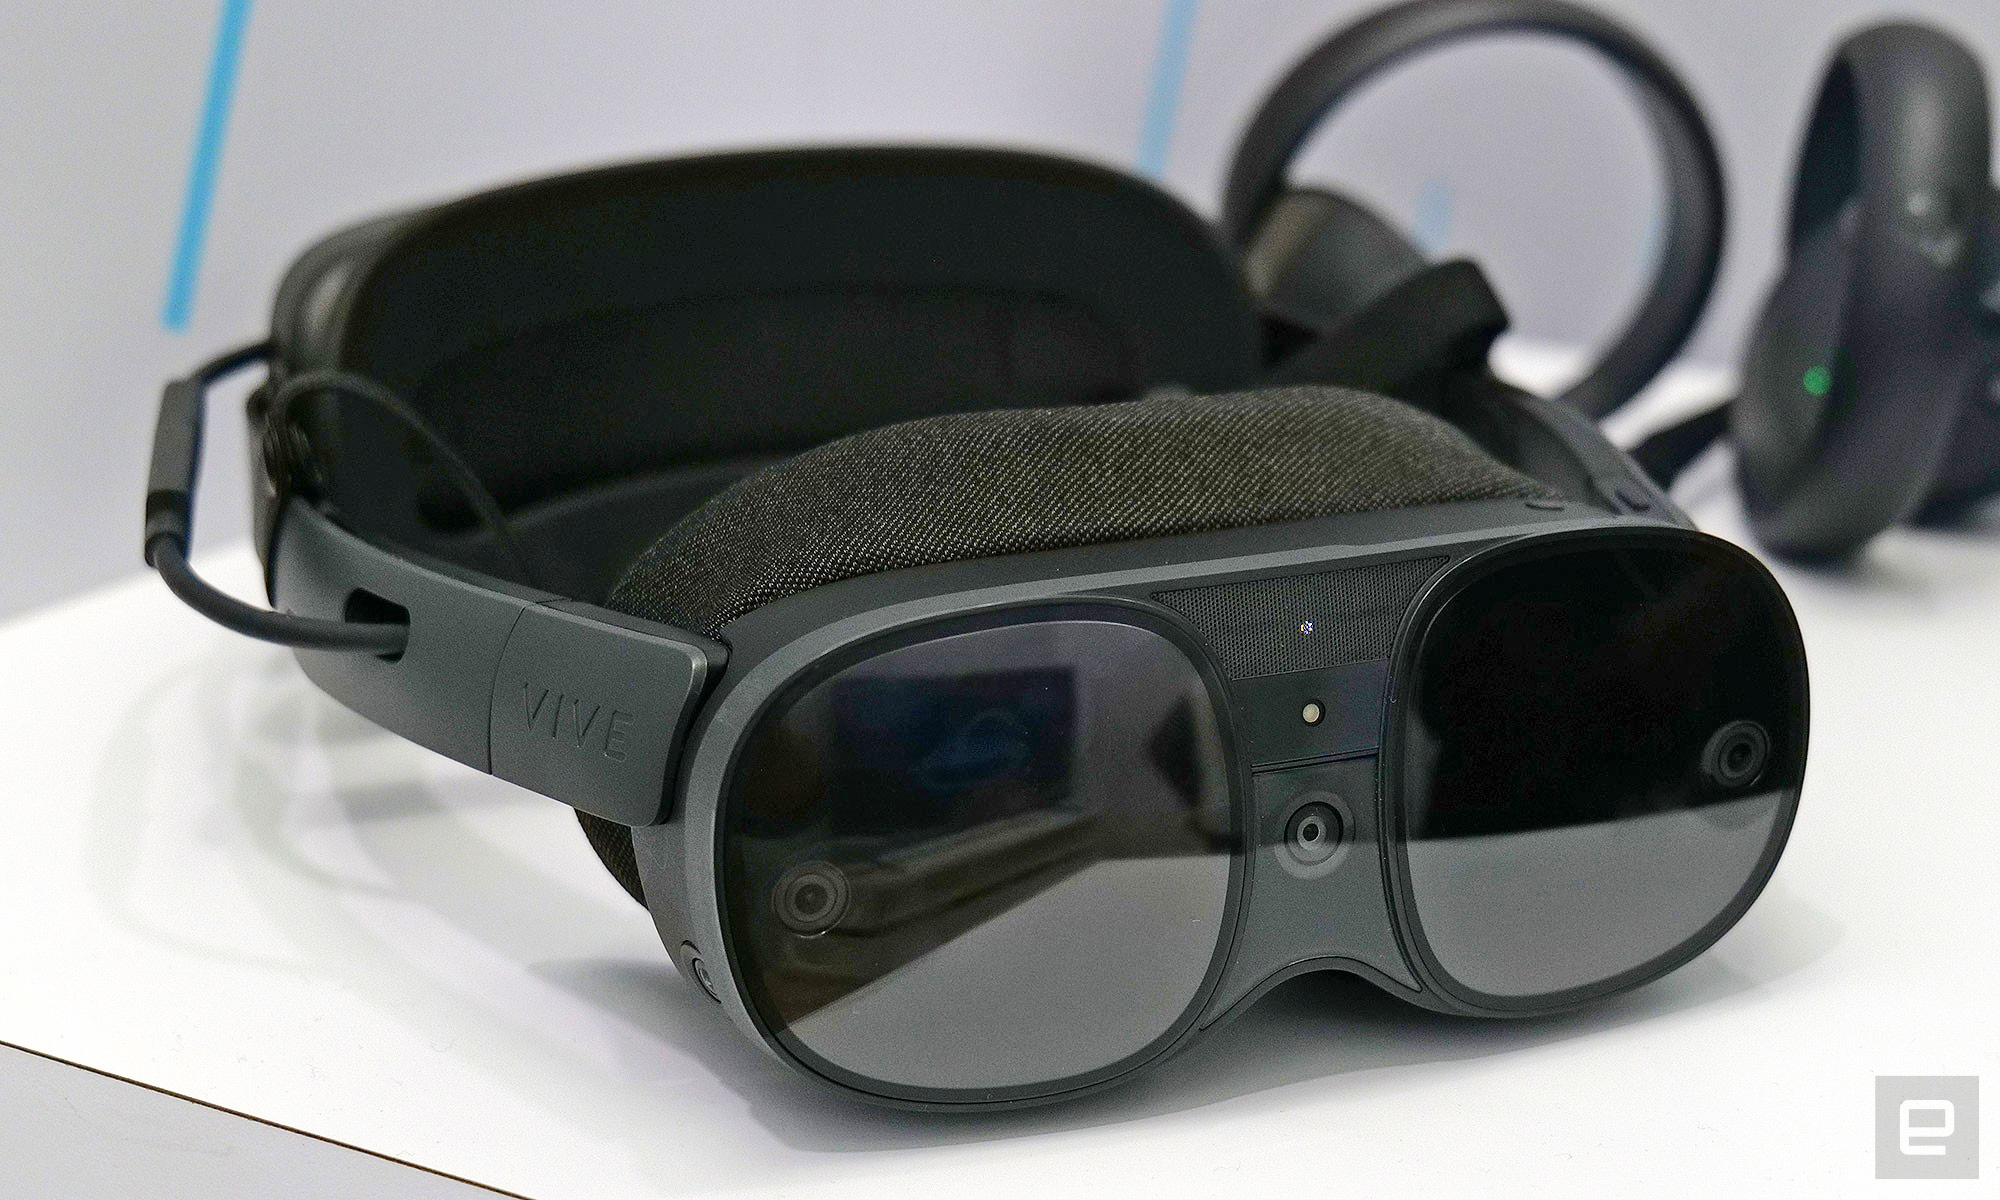 Vive XR Elite hands-on: HTC’s more portable answer to the Meta Quest Pro